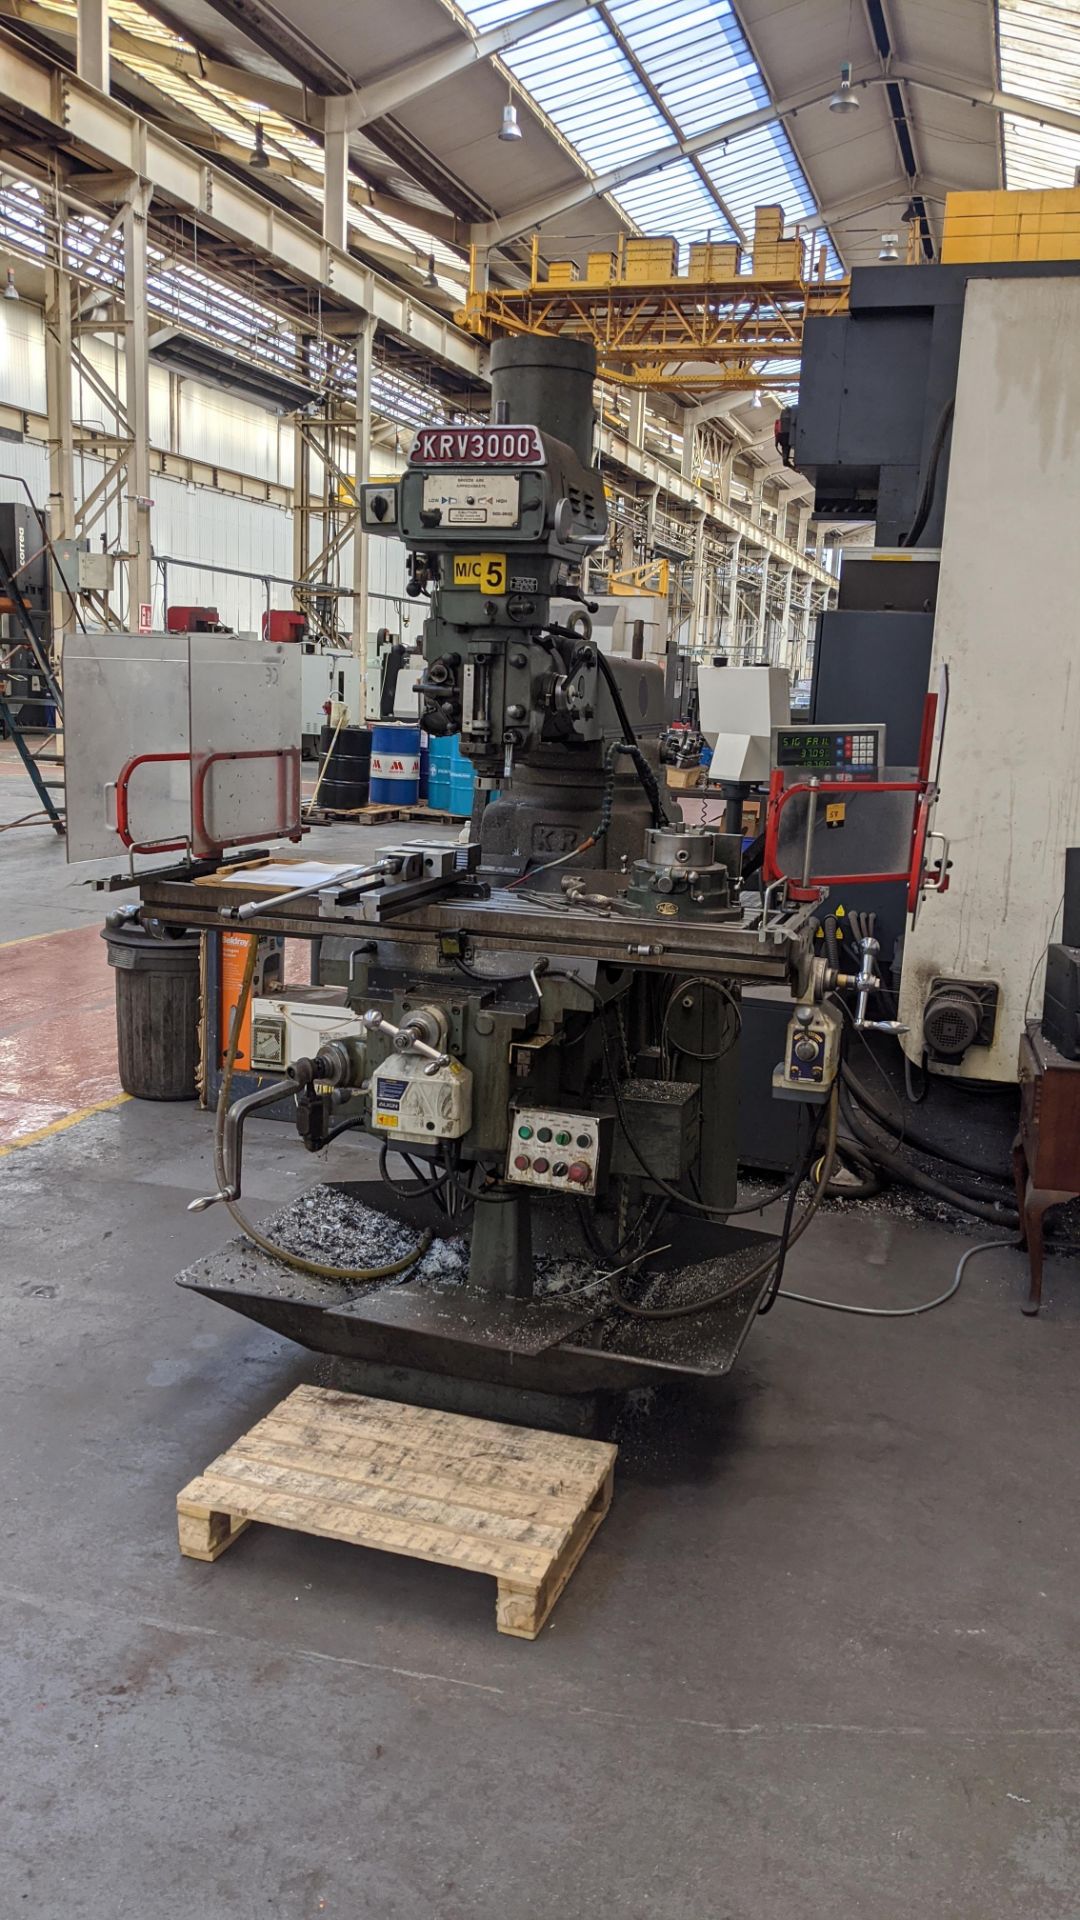 1998 King Rich KRV3000-V milling machine, serial no. 8470. Includes Newall Topaz Mill controller. - Image 5 of 15